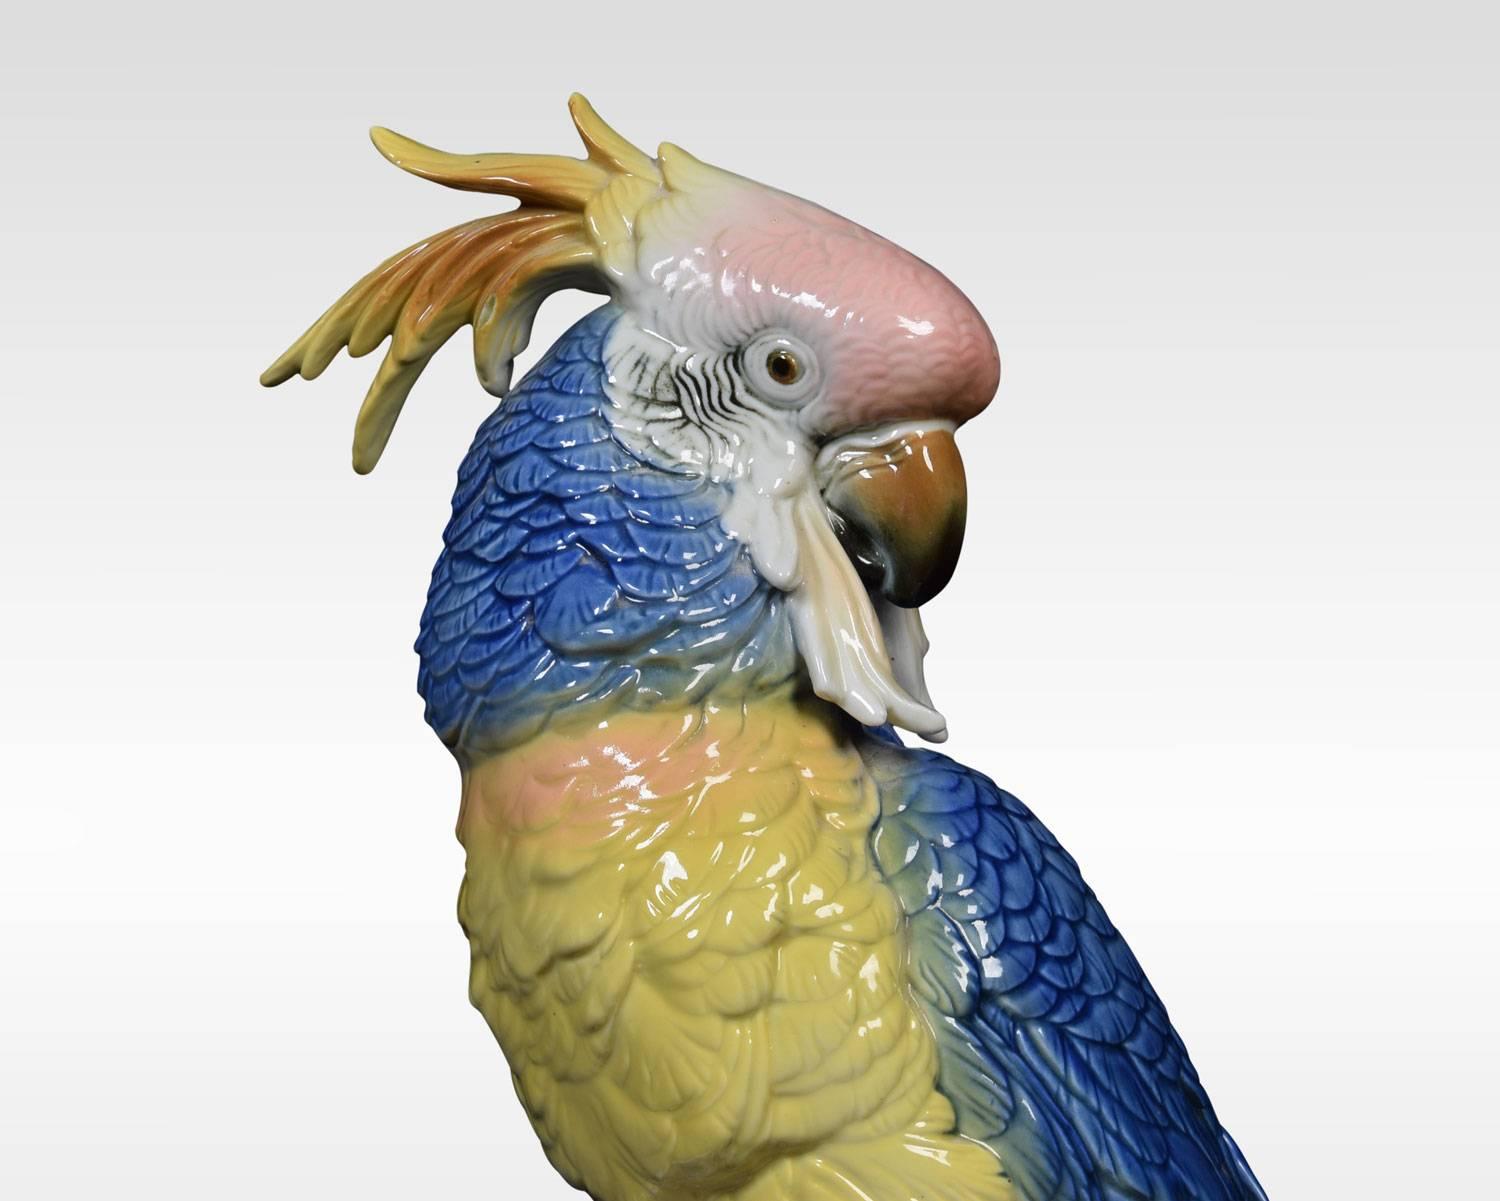 A mid-20th century German porcelain parrot by Karl Ens. The colorful parrot figure is perched on a white tree branch markings underneath.
Dimensions
Height 13 inches
Width 7.5 inches
Depth 6 inches.